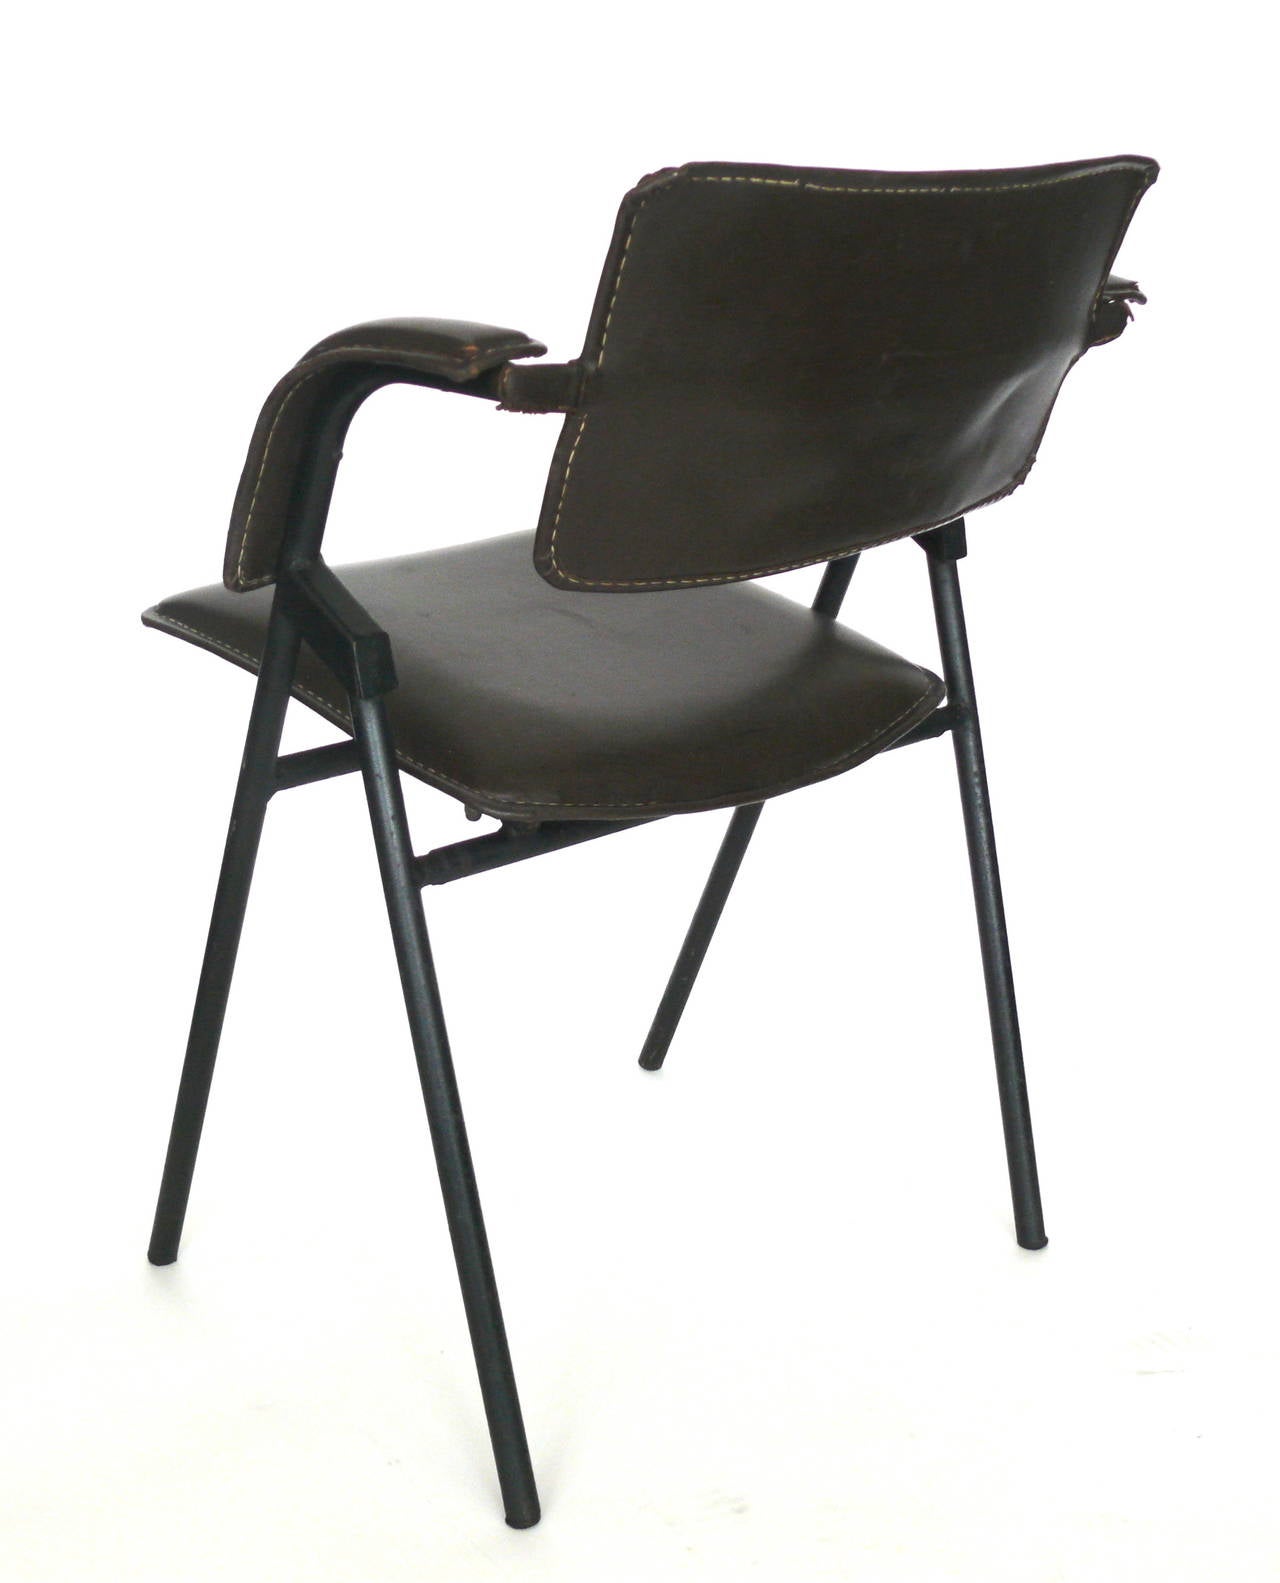 Great sculptural chair by French architect Jacques Dumont. Iron frame with black leather and white contrast stitching. Leather is in very good vintage condition with some blemishes and area where seam is opened. 